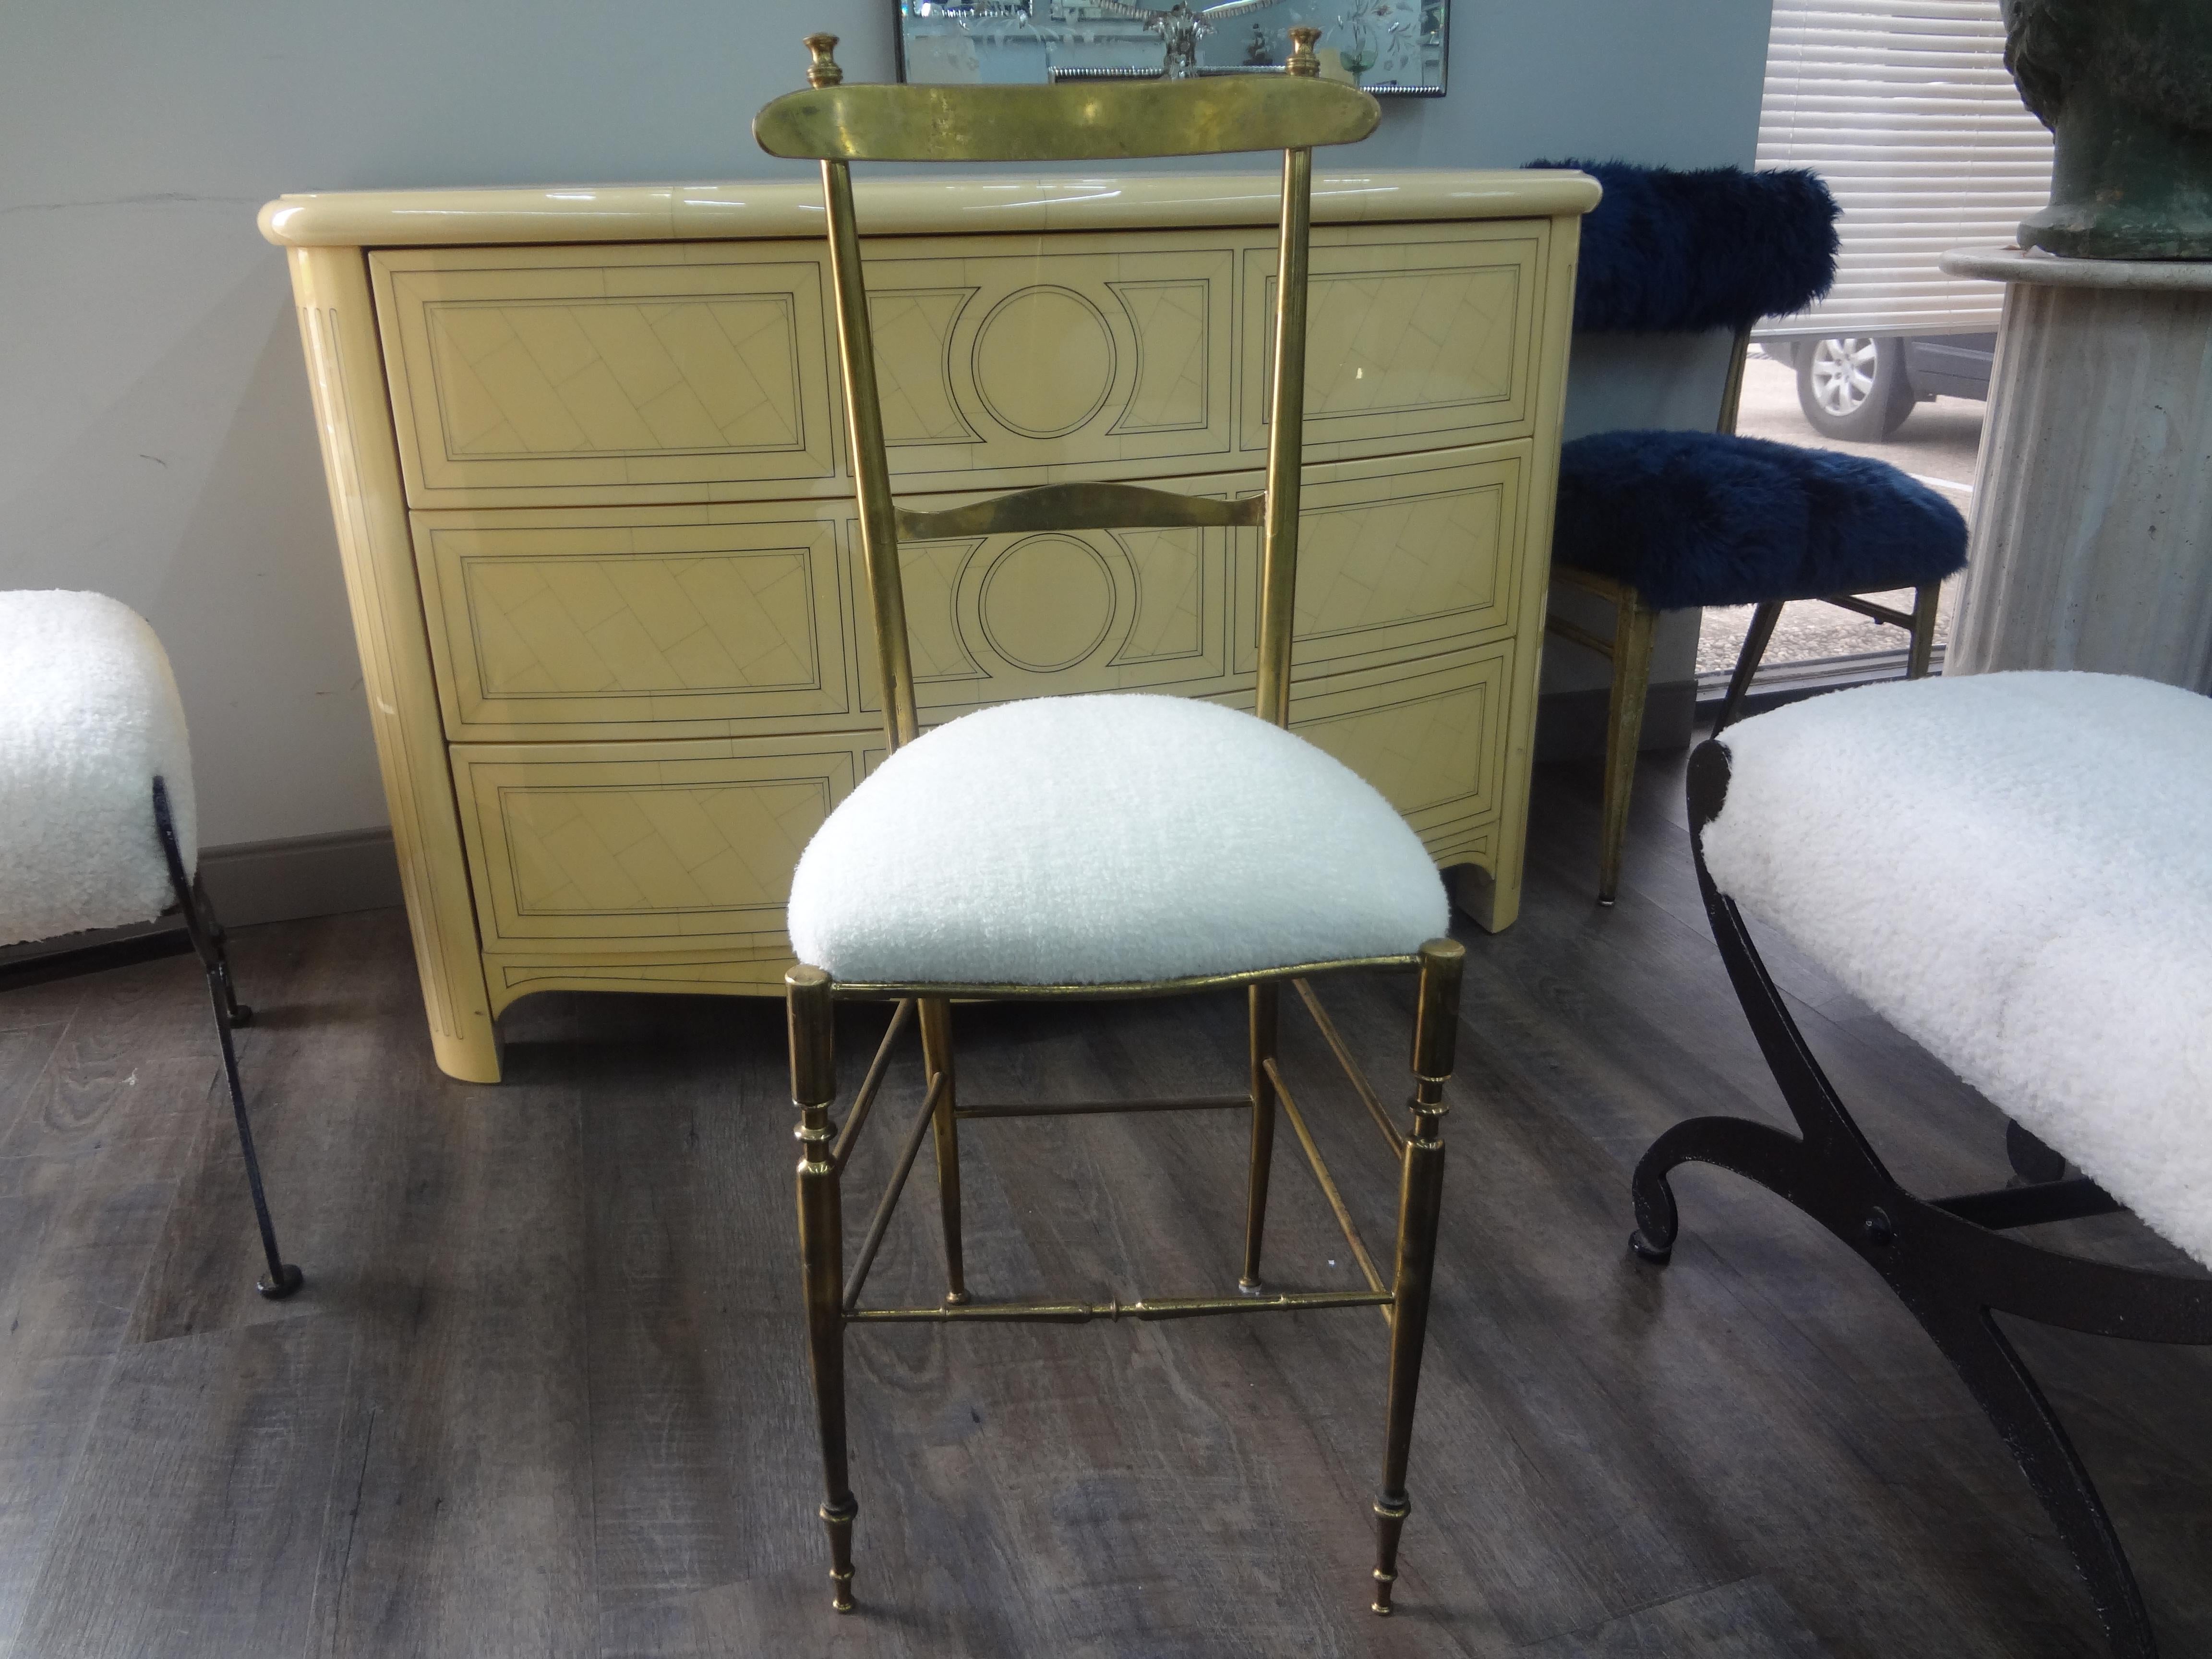 Vintage Italian Modern Neoclassical style brass Chiavari chair. This stunning Italian Chiavari chair is newly upholstered in a lovely white mohair fabric. Our Italian brass chair is perfect flanking a console table, as a vanity chair, desk chair or